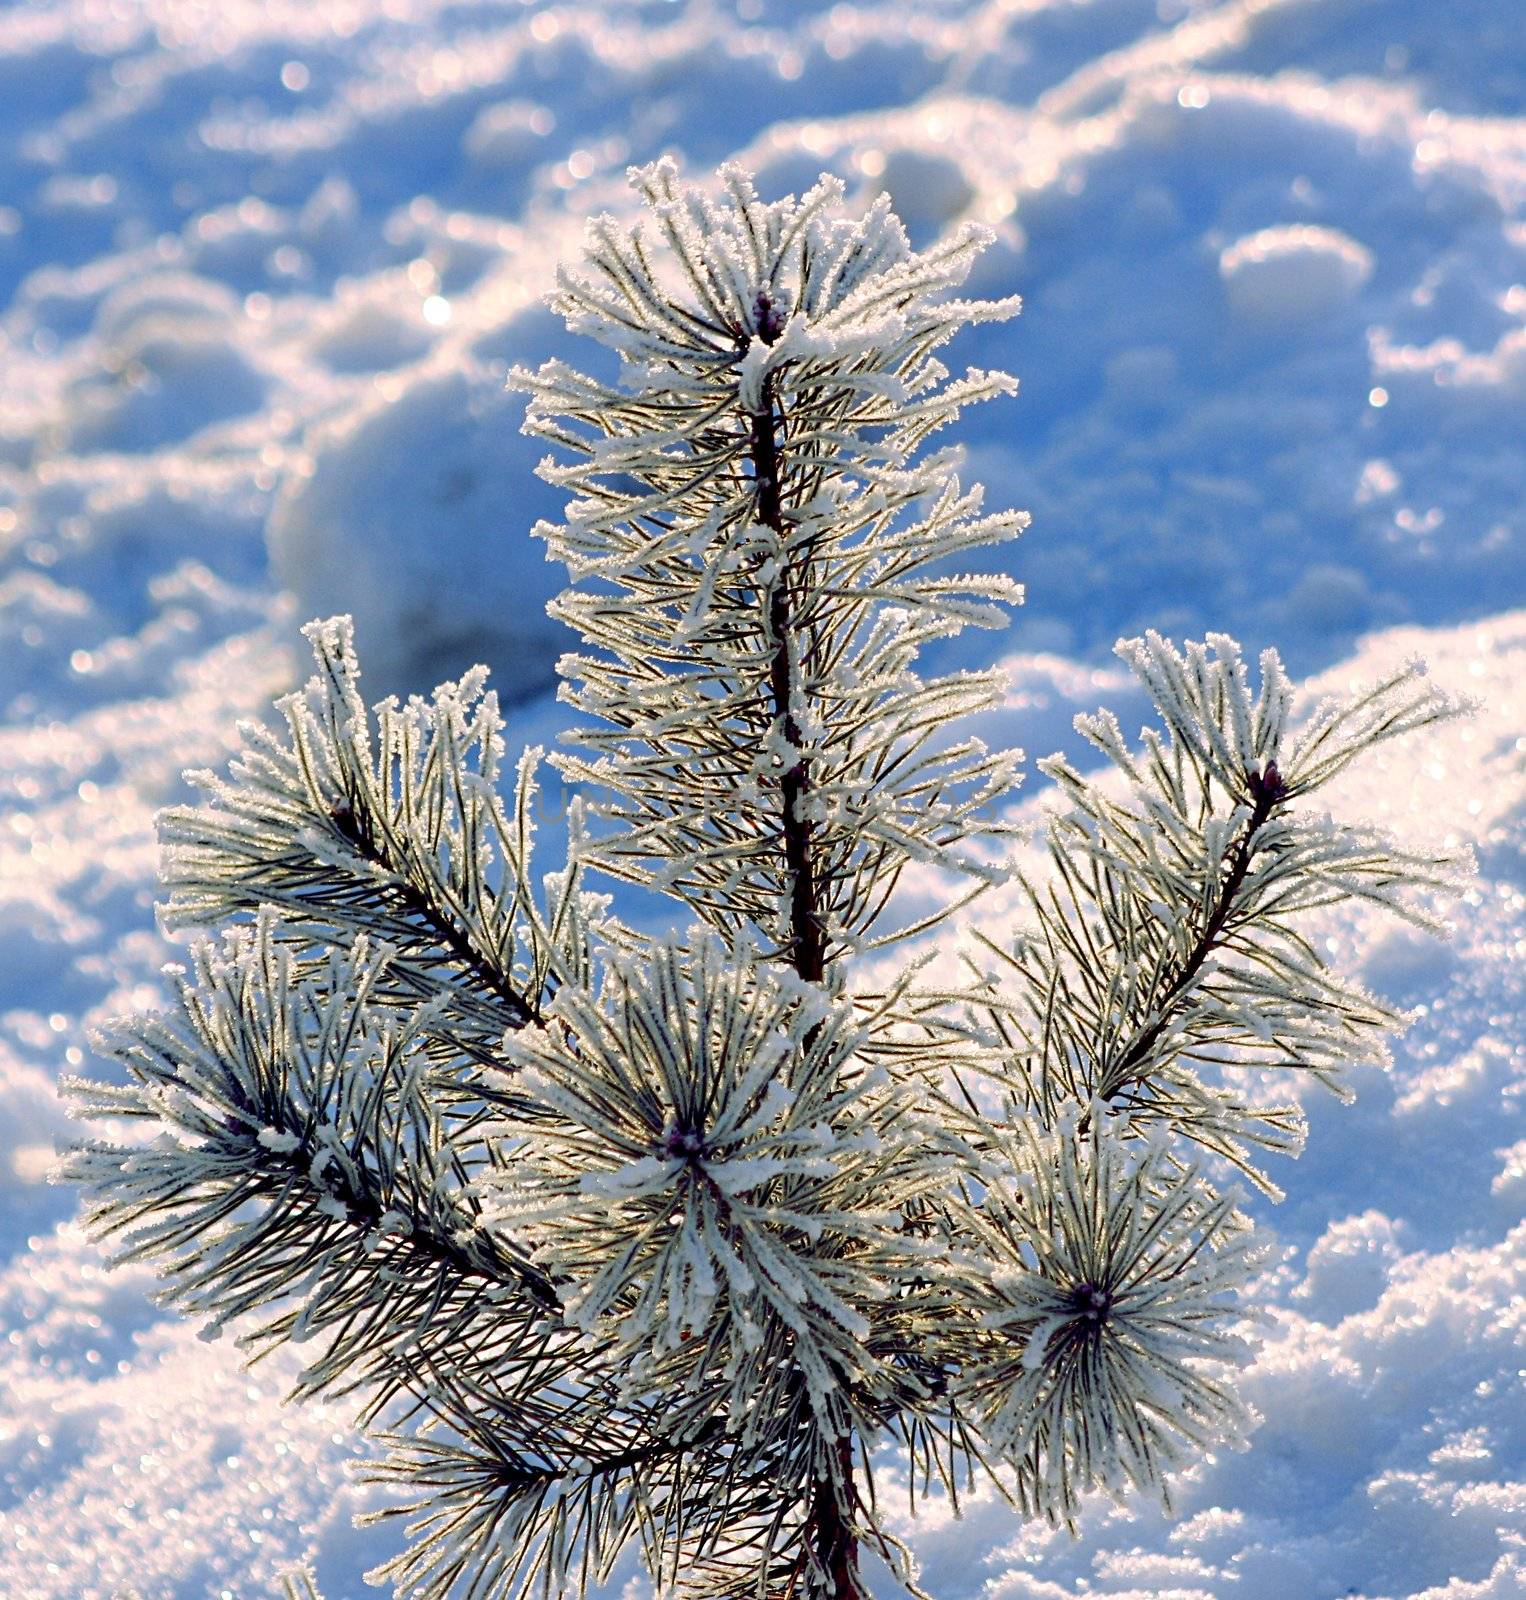 The top of a small pine beset with ice crystals, against a snowy background